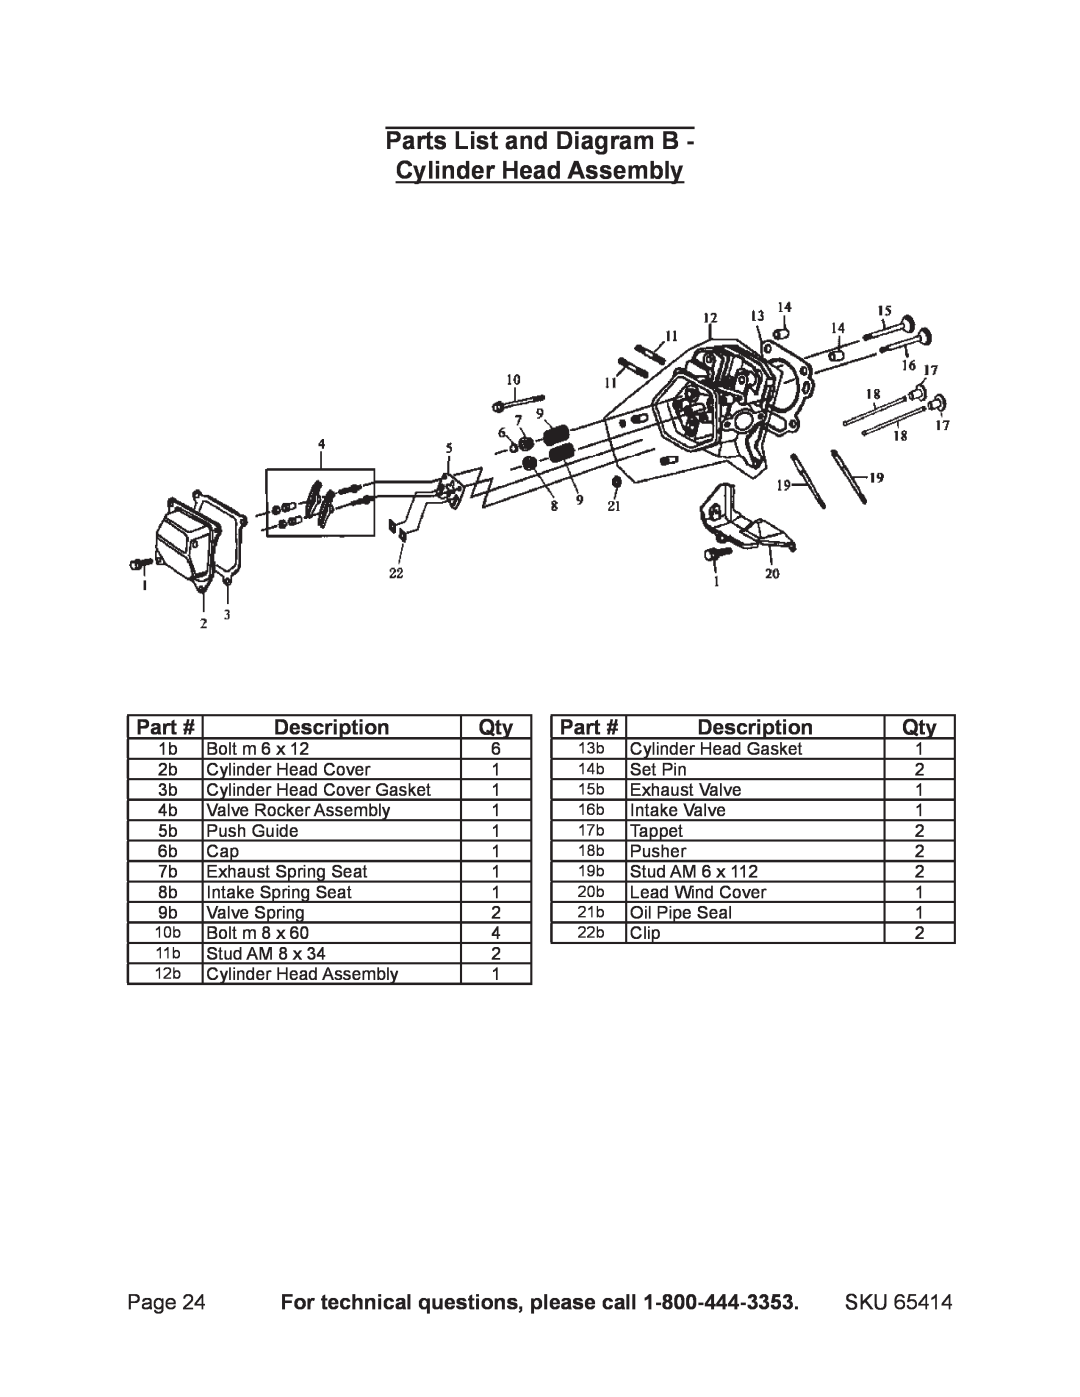 Chicago Electric 65414 Parts List and Diagram B Cylinder Head Assembly, Description, For technical questions, please call 